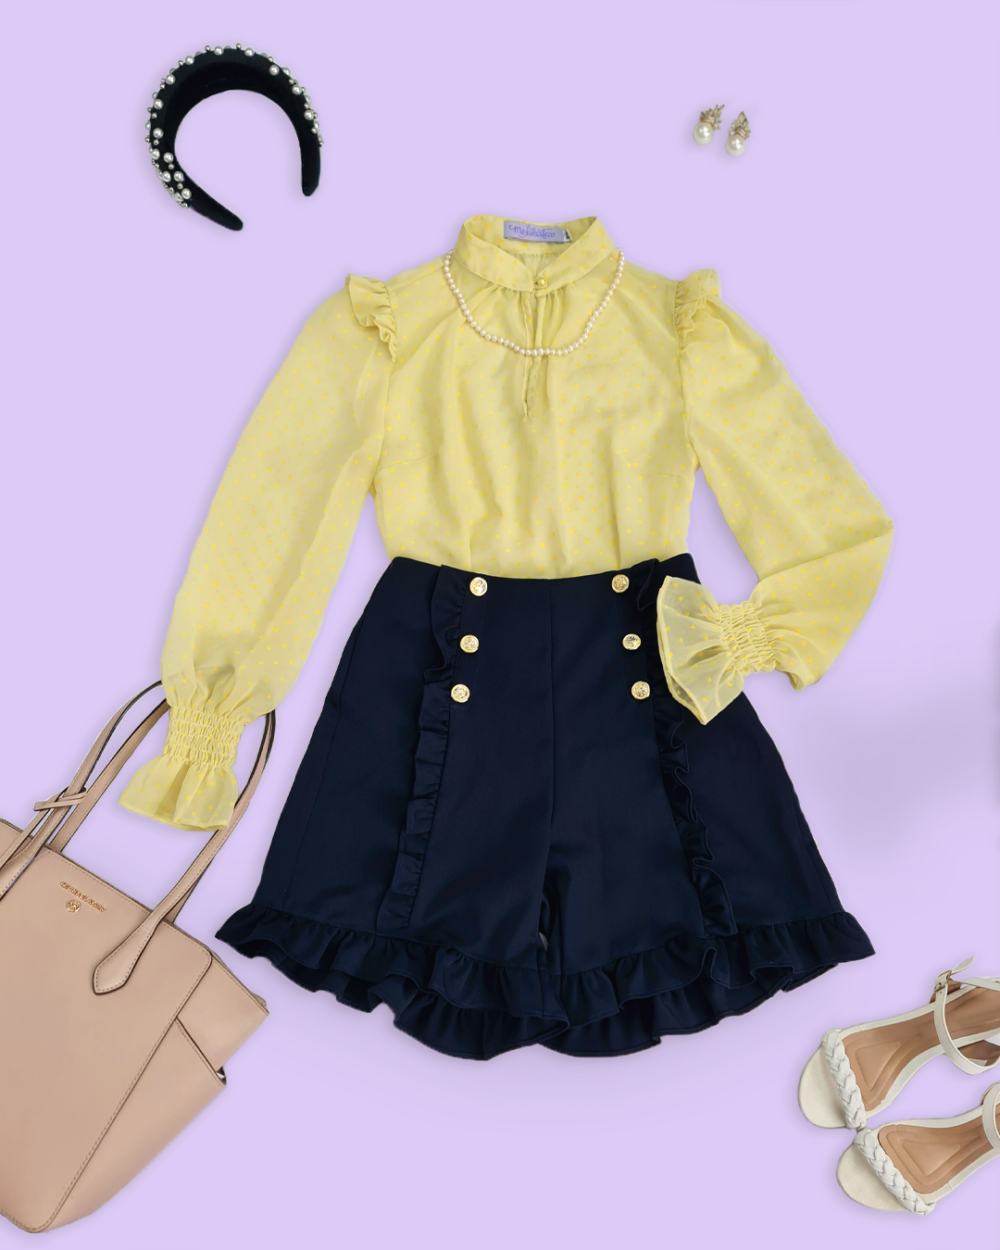 outfit flatlay, yellow blouse and navy sailor shorts